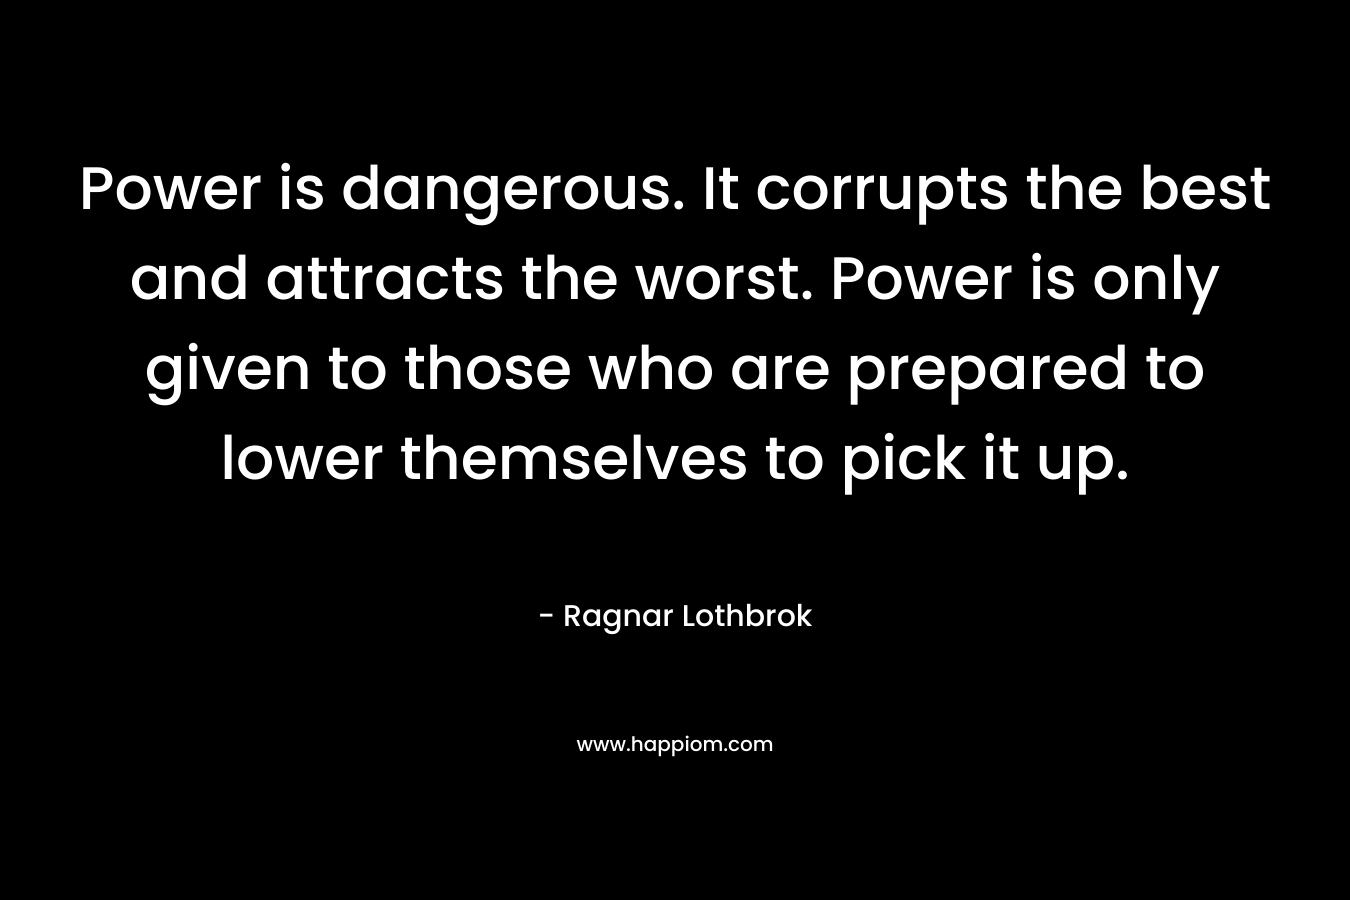 Power is dangerous. It corrupts the best and attracts the worst. Power is only given to those who are prepared to lower themselves to pick it up.